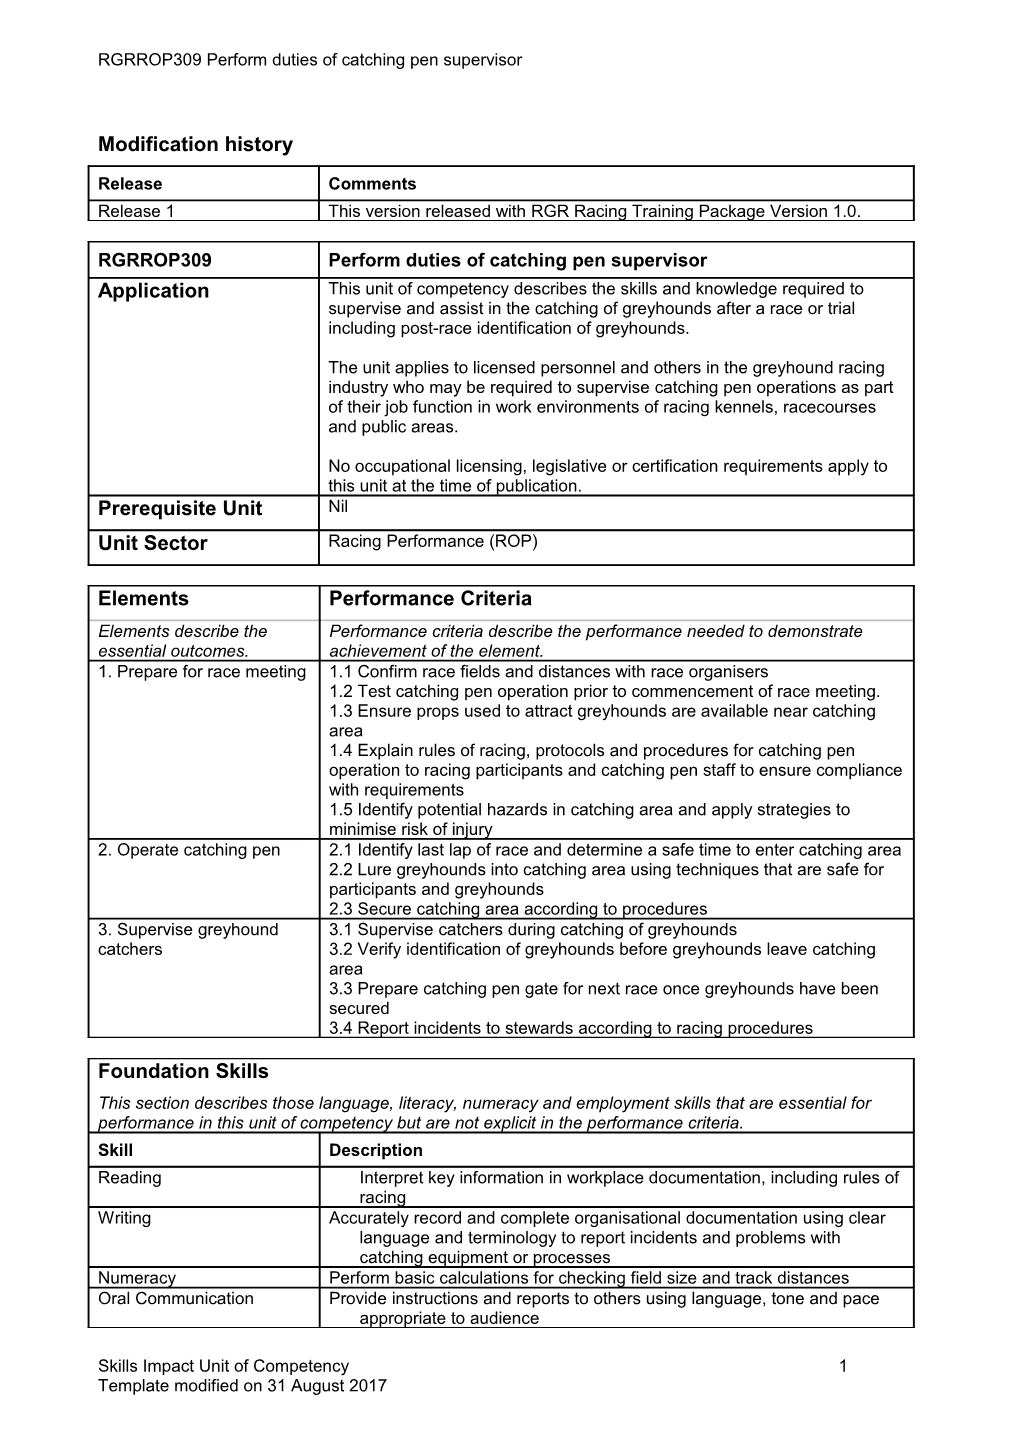 Skills Impact Unit of Competency Template s2